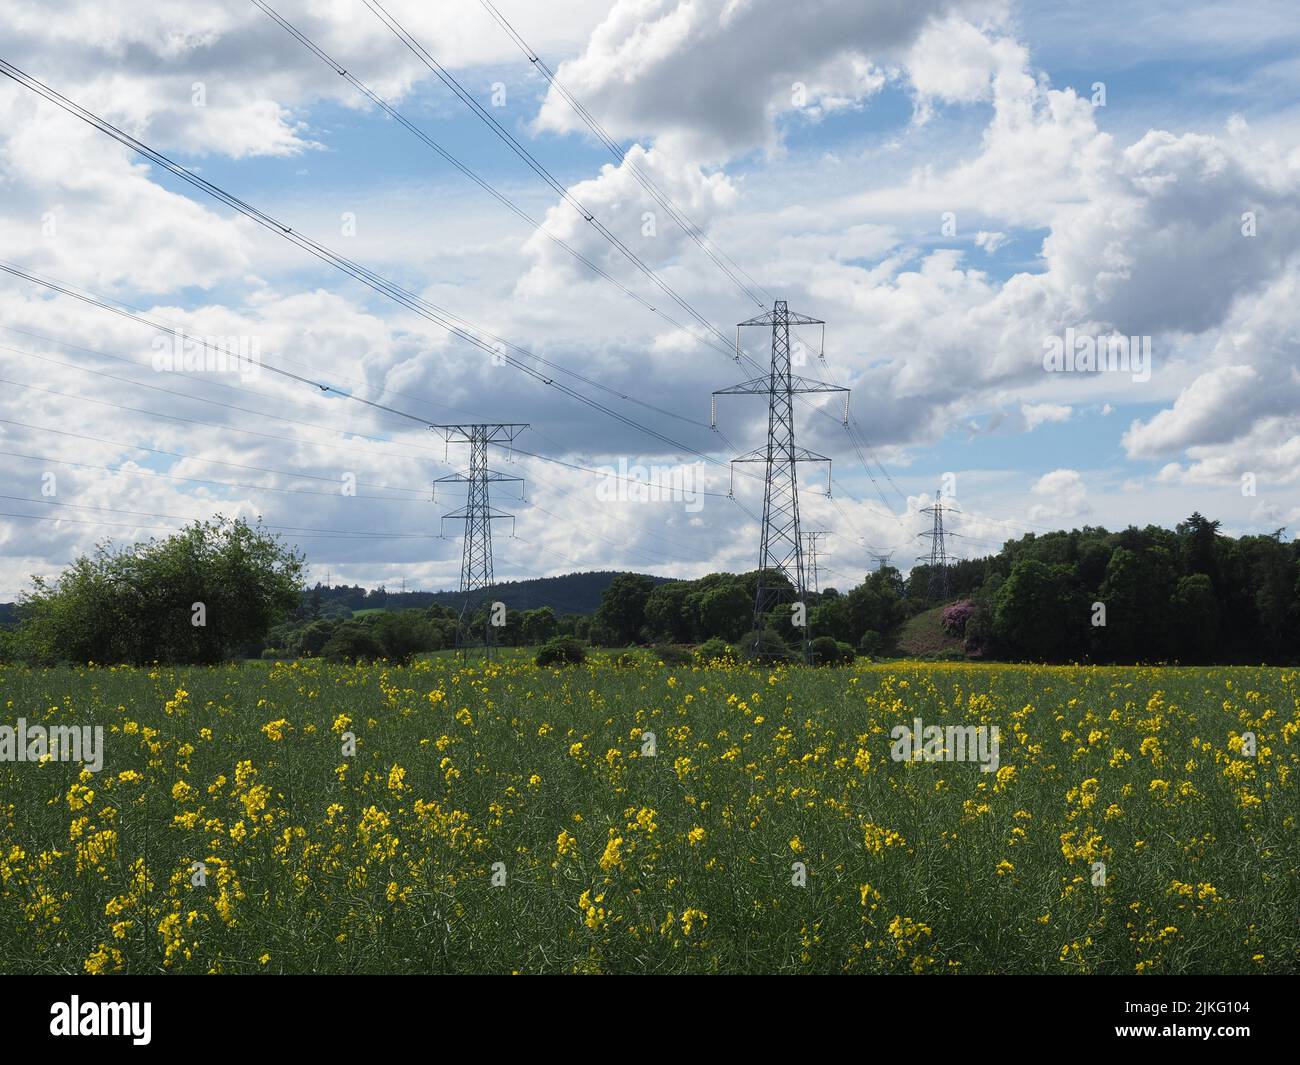 Electricity pylons in a field of rapeseed against a cloudy blue sky & sunshine. Trees in the distance. Stock Photo